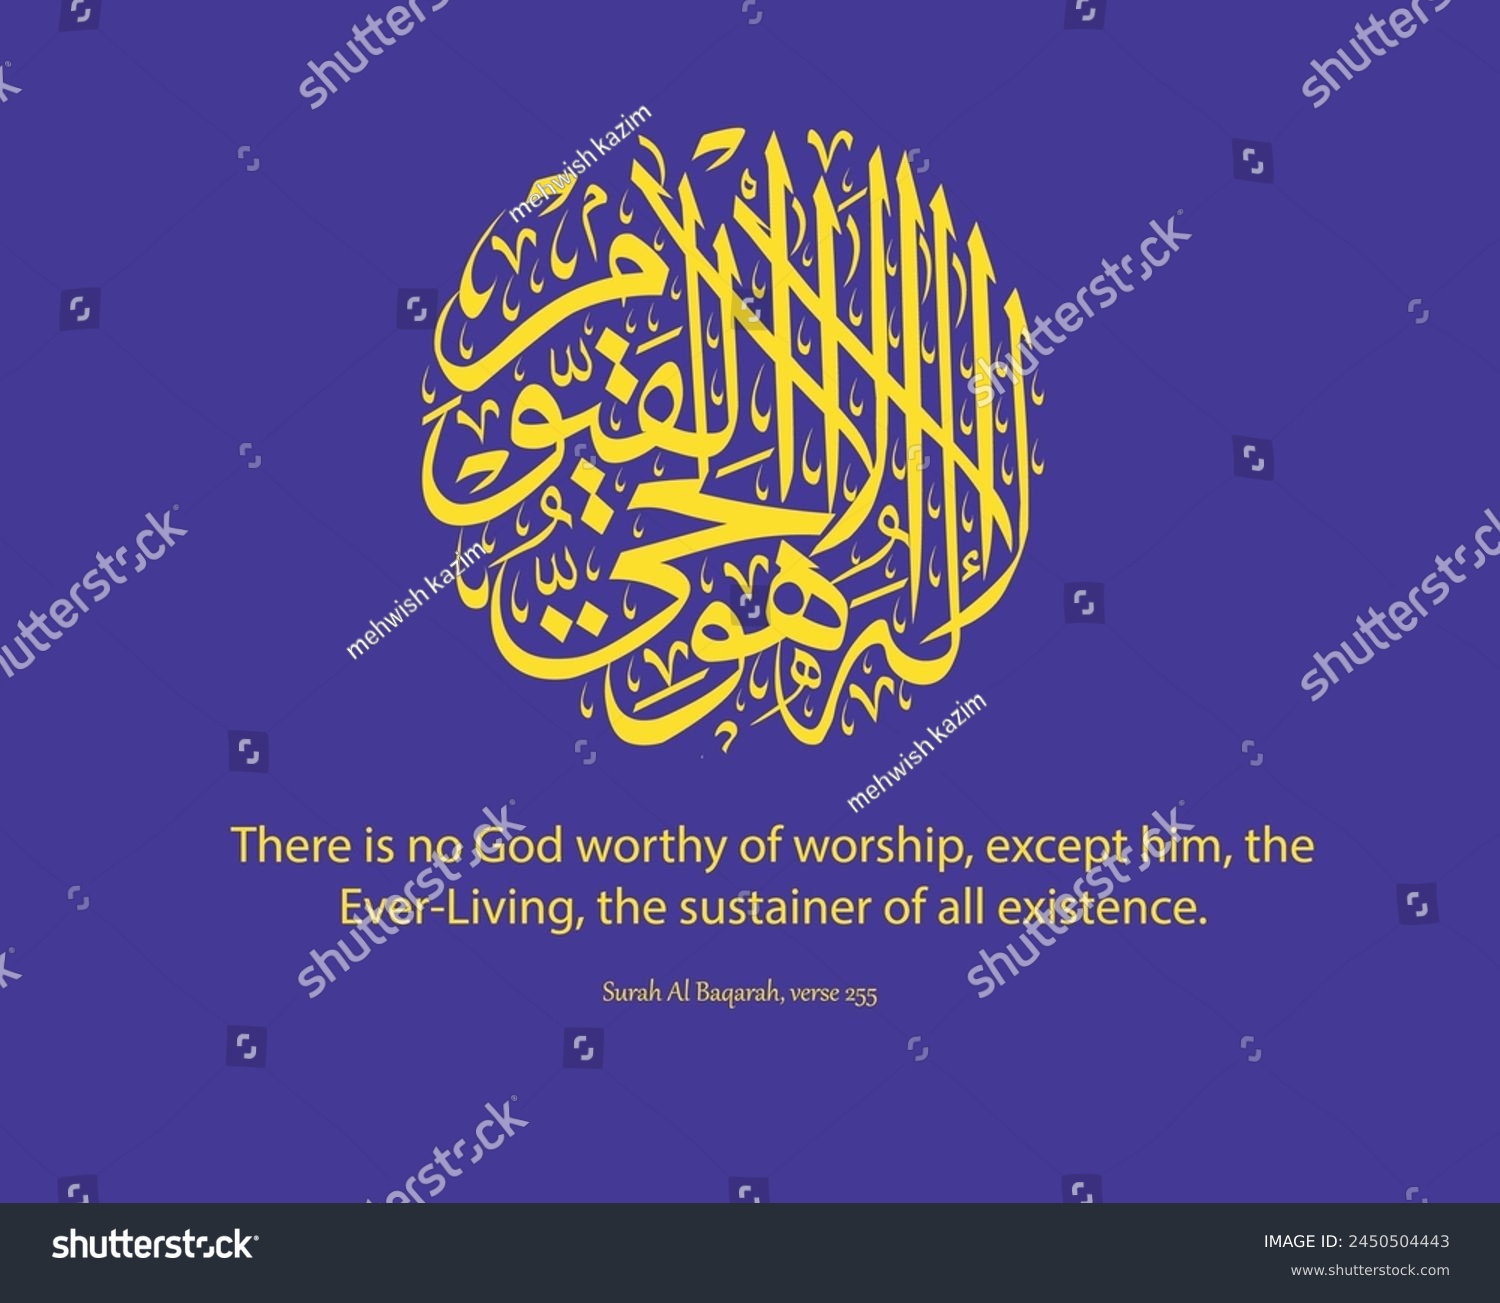 SVG of there is no worthy of worship except him, the Ever-Living, the sustainer of existence calligraphy arabic ayat ul kursi  svg